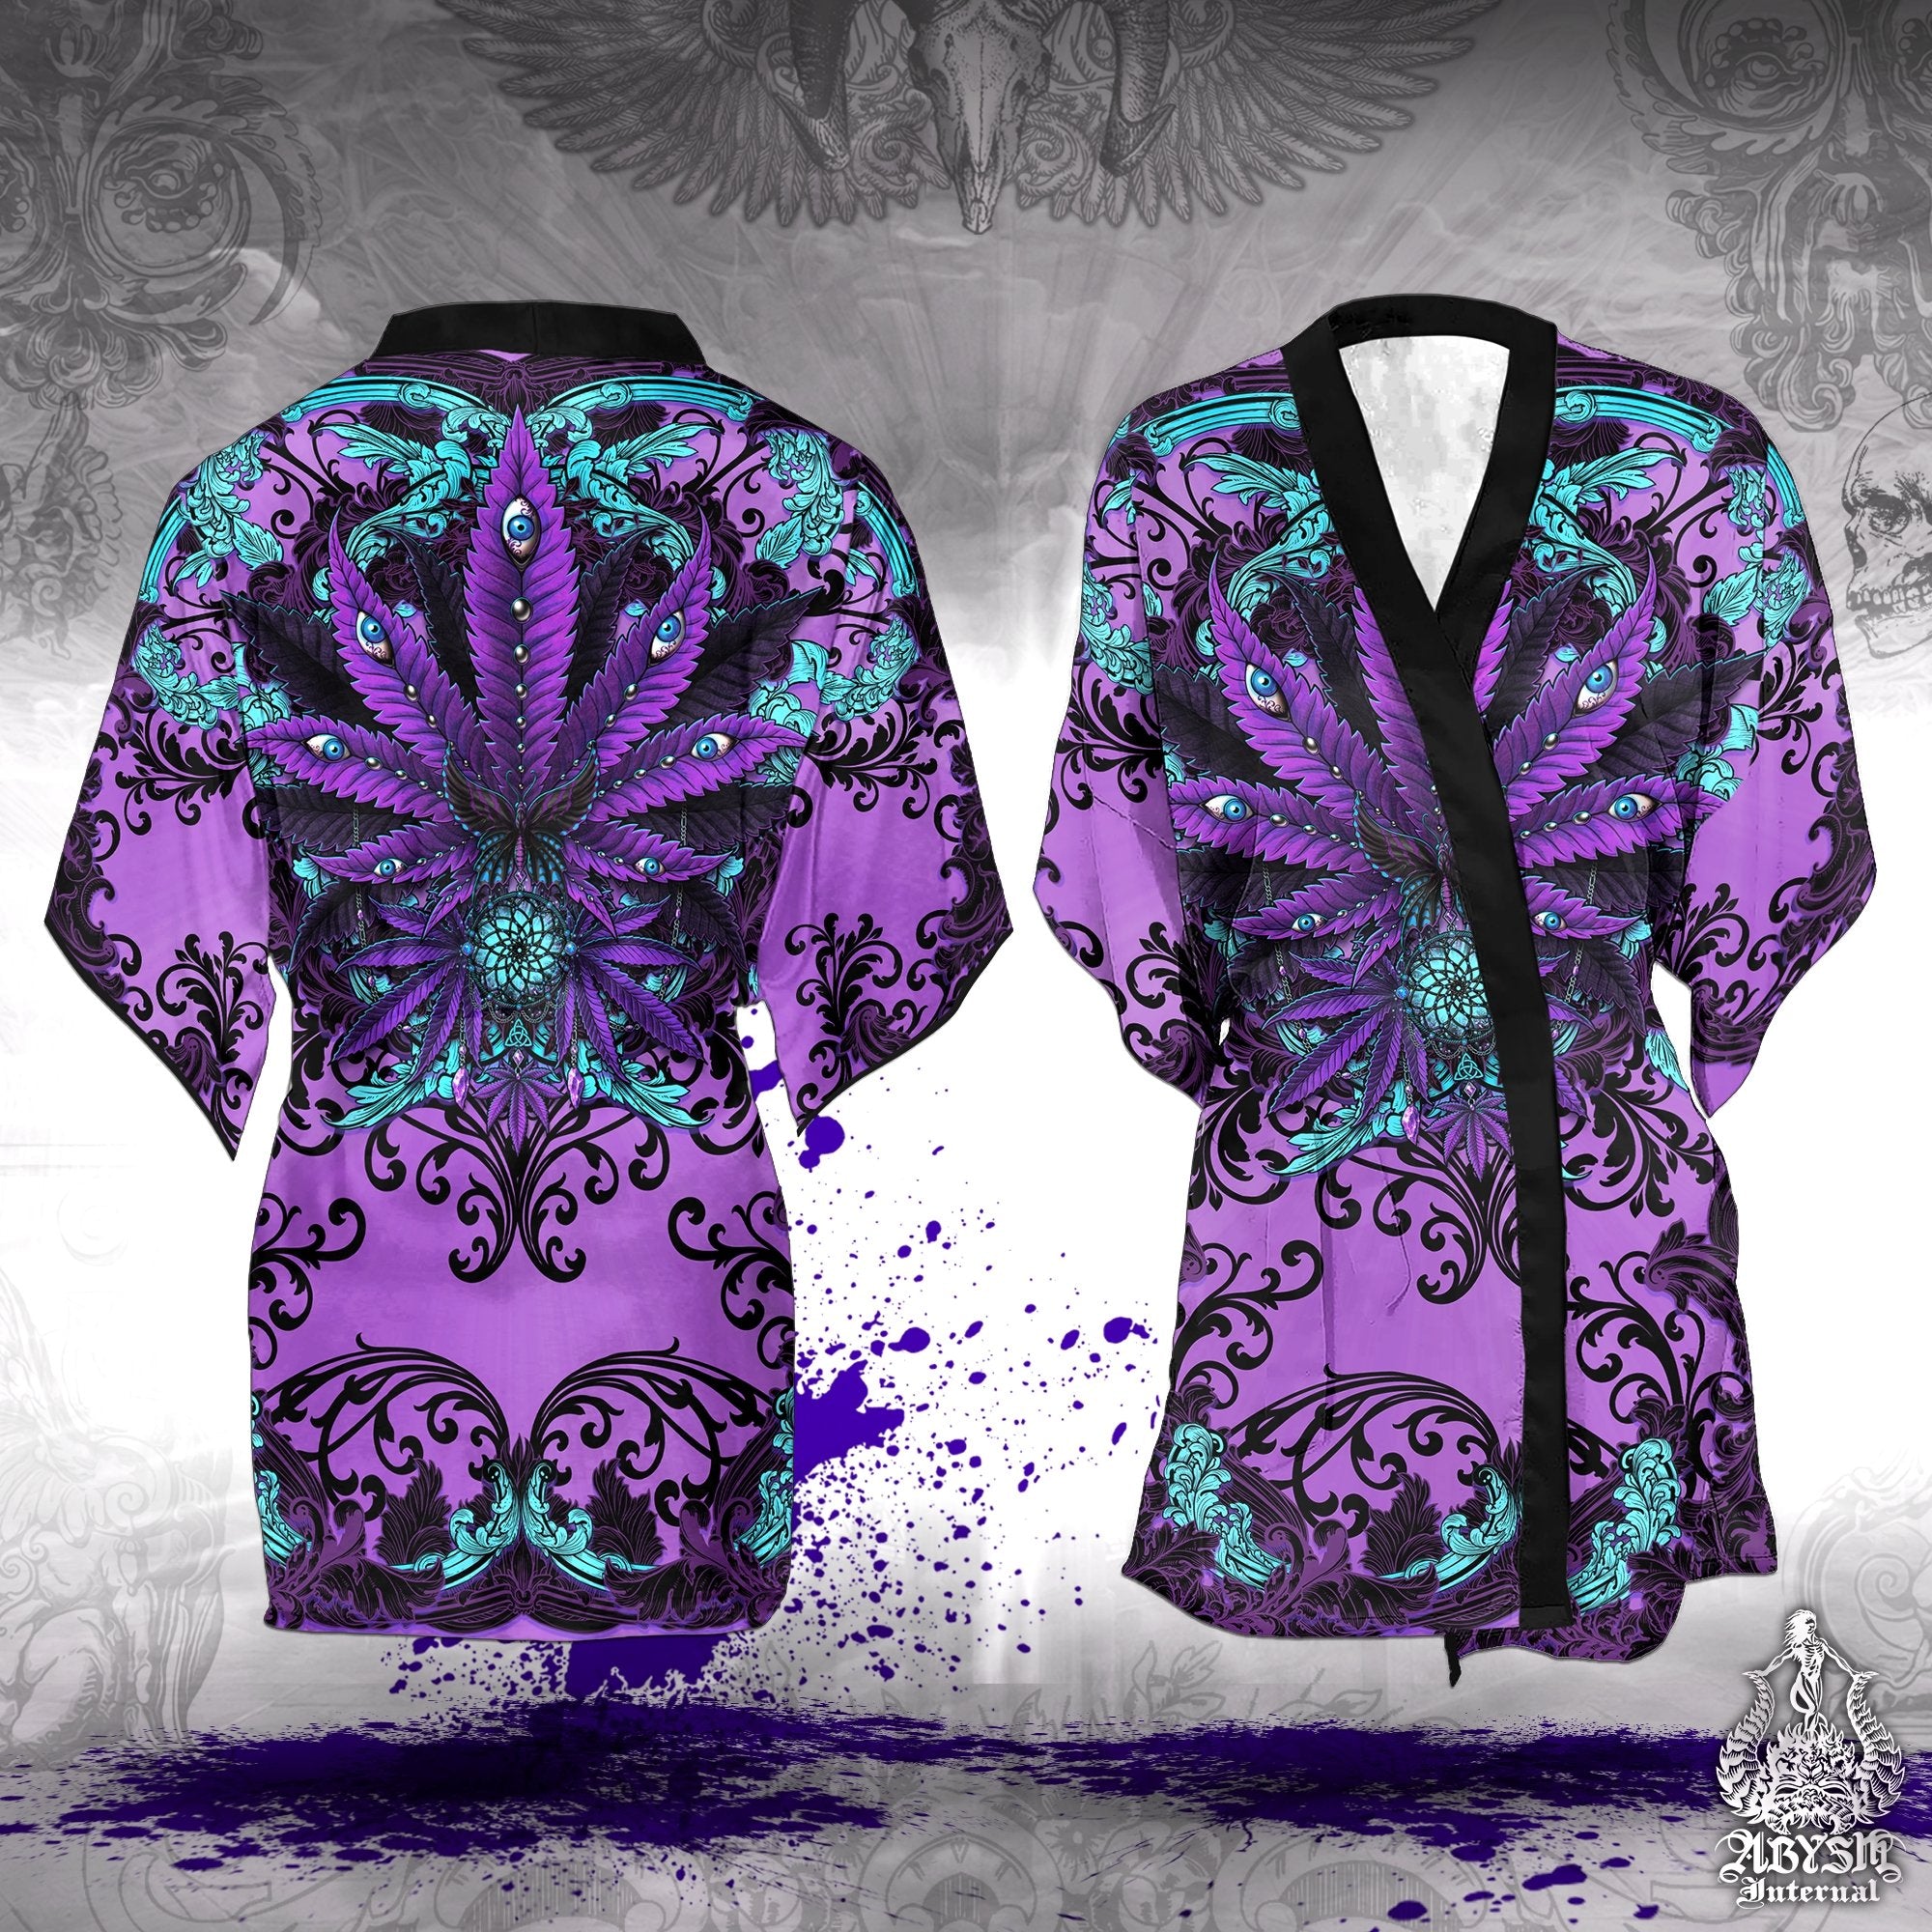 Weed Cover Up, Cannabis Outfit, Party Kimono, Pastel Goth Summer Festival Robe, 420 Gift, Alternative Clothing, Unisex - Marijuana - Abysm Internal